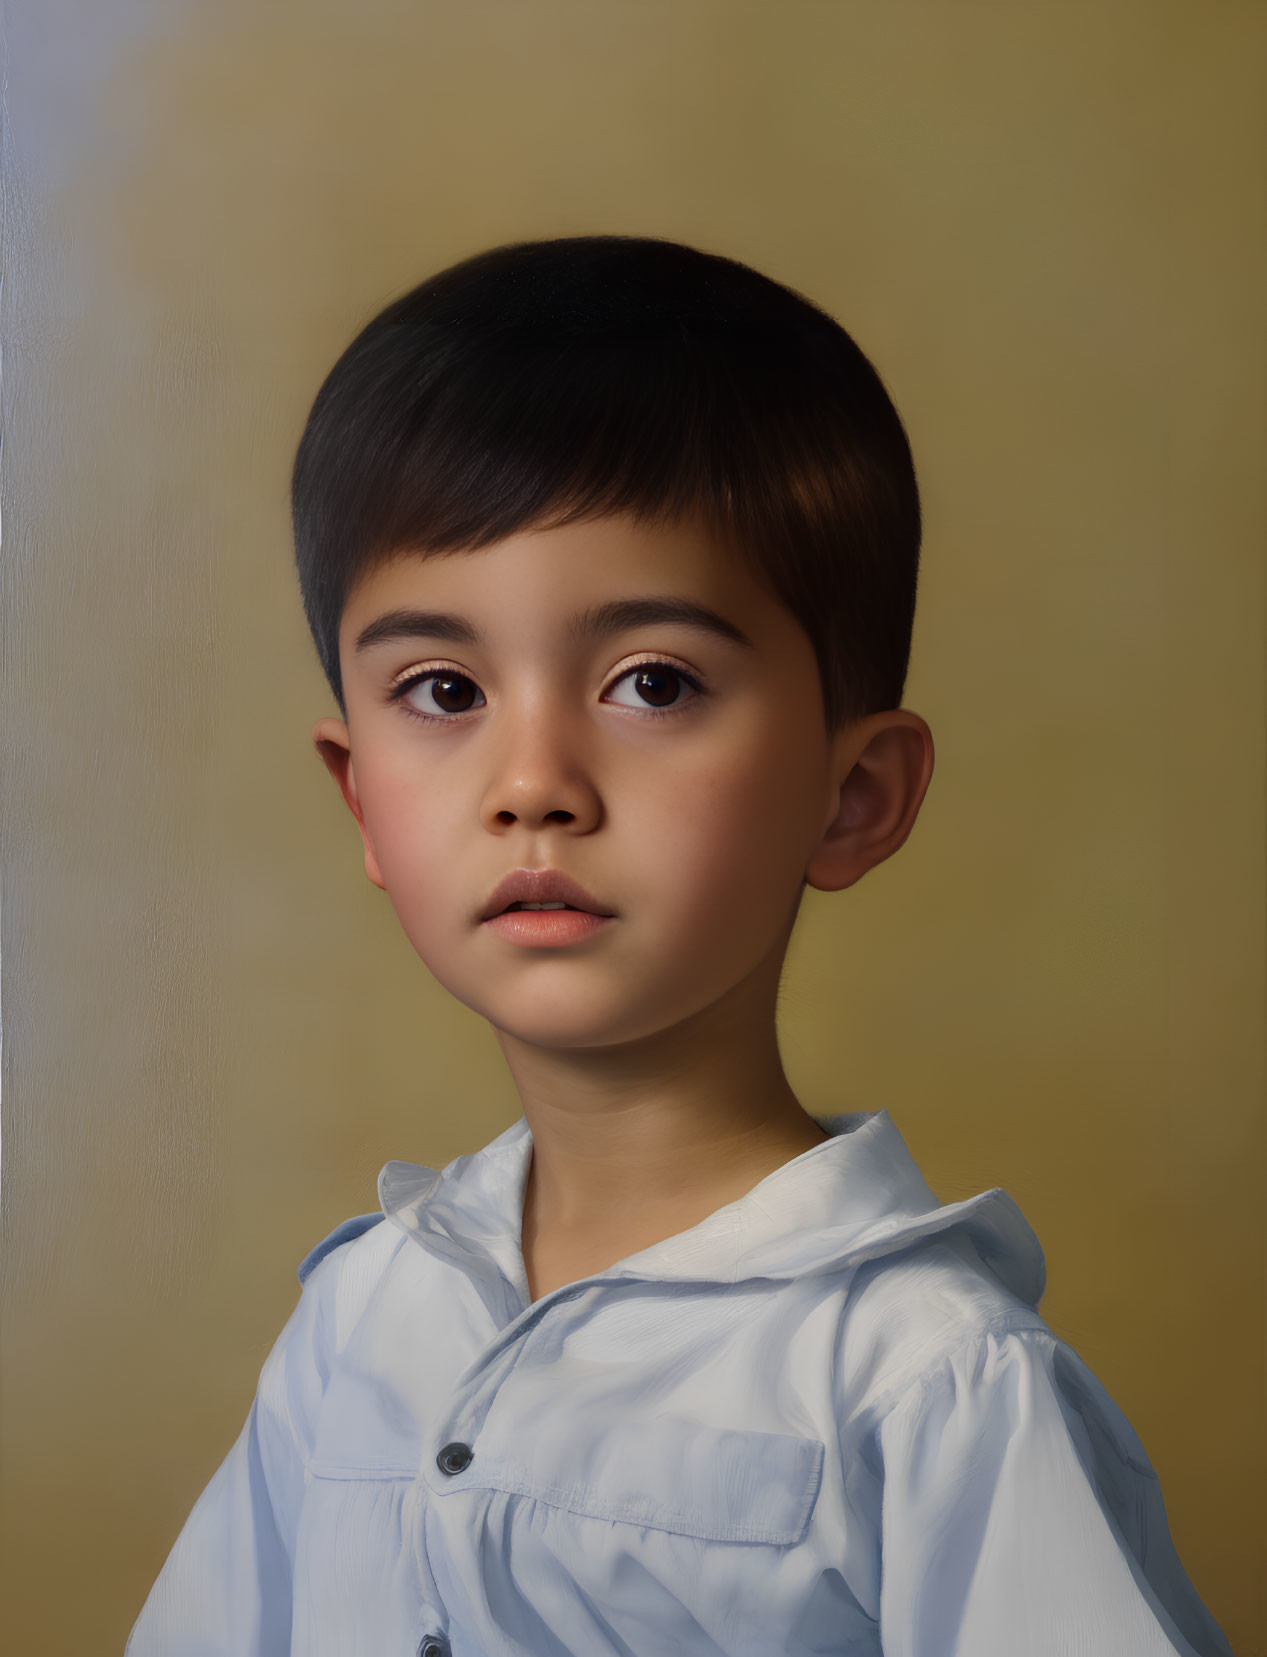 Young child portrait with solemn expression, dark hair, light blue shirt, beige backdrop